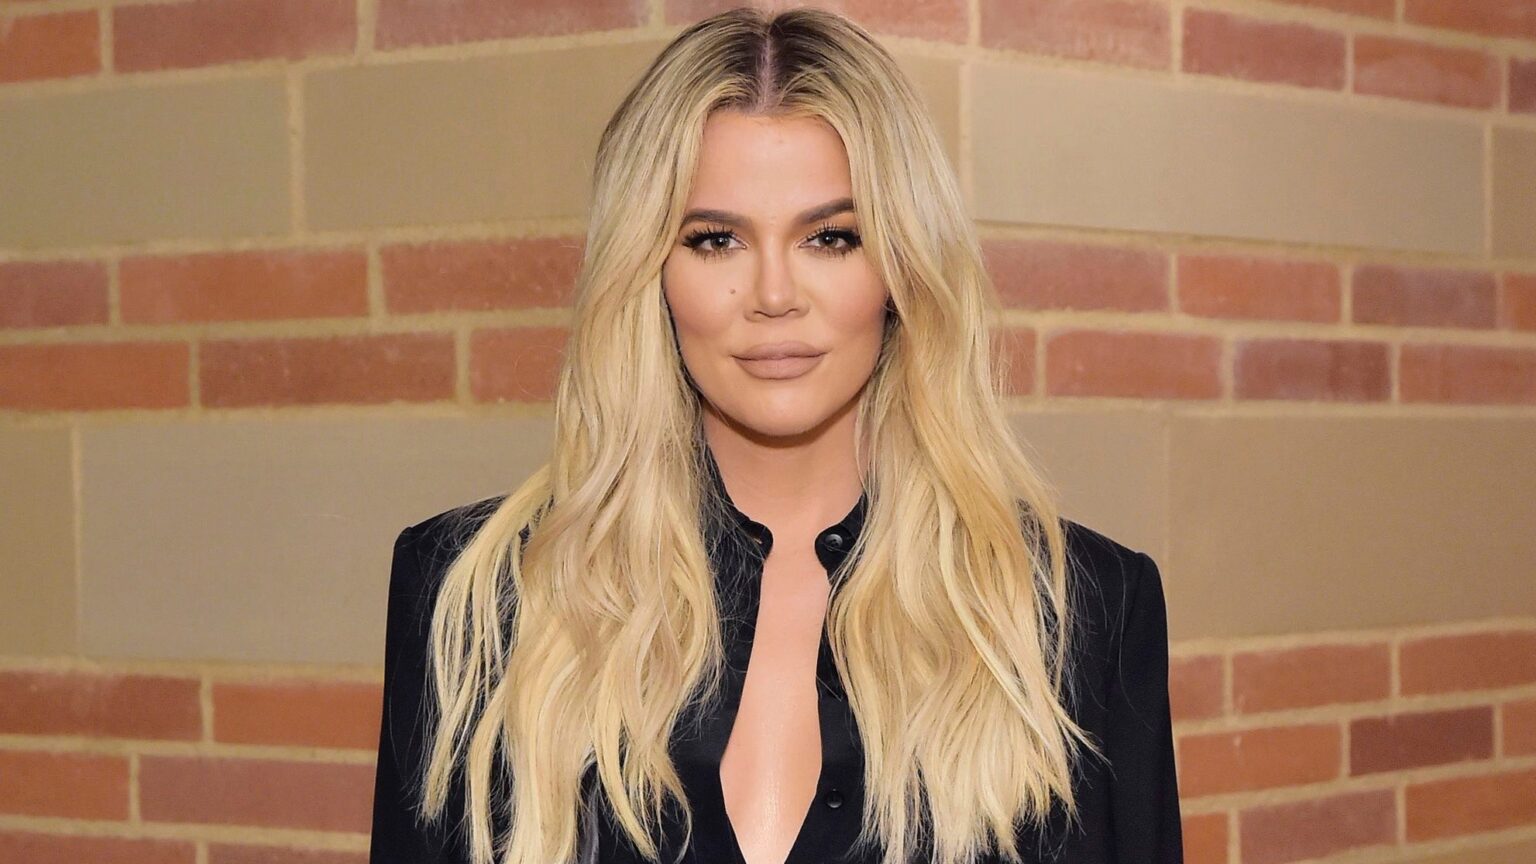 Did NBA star Tristan Thompson really cheat on Khloe Kardashian for the second time? Learn all the details behind this troubling relationship.